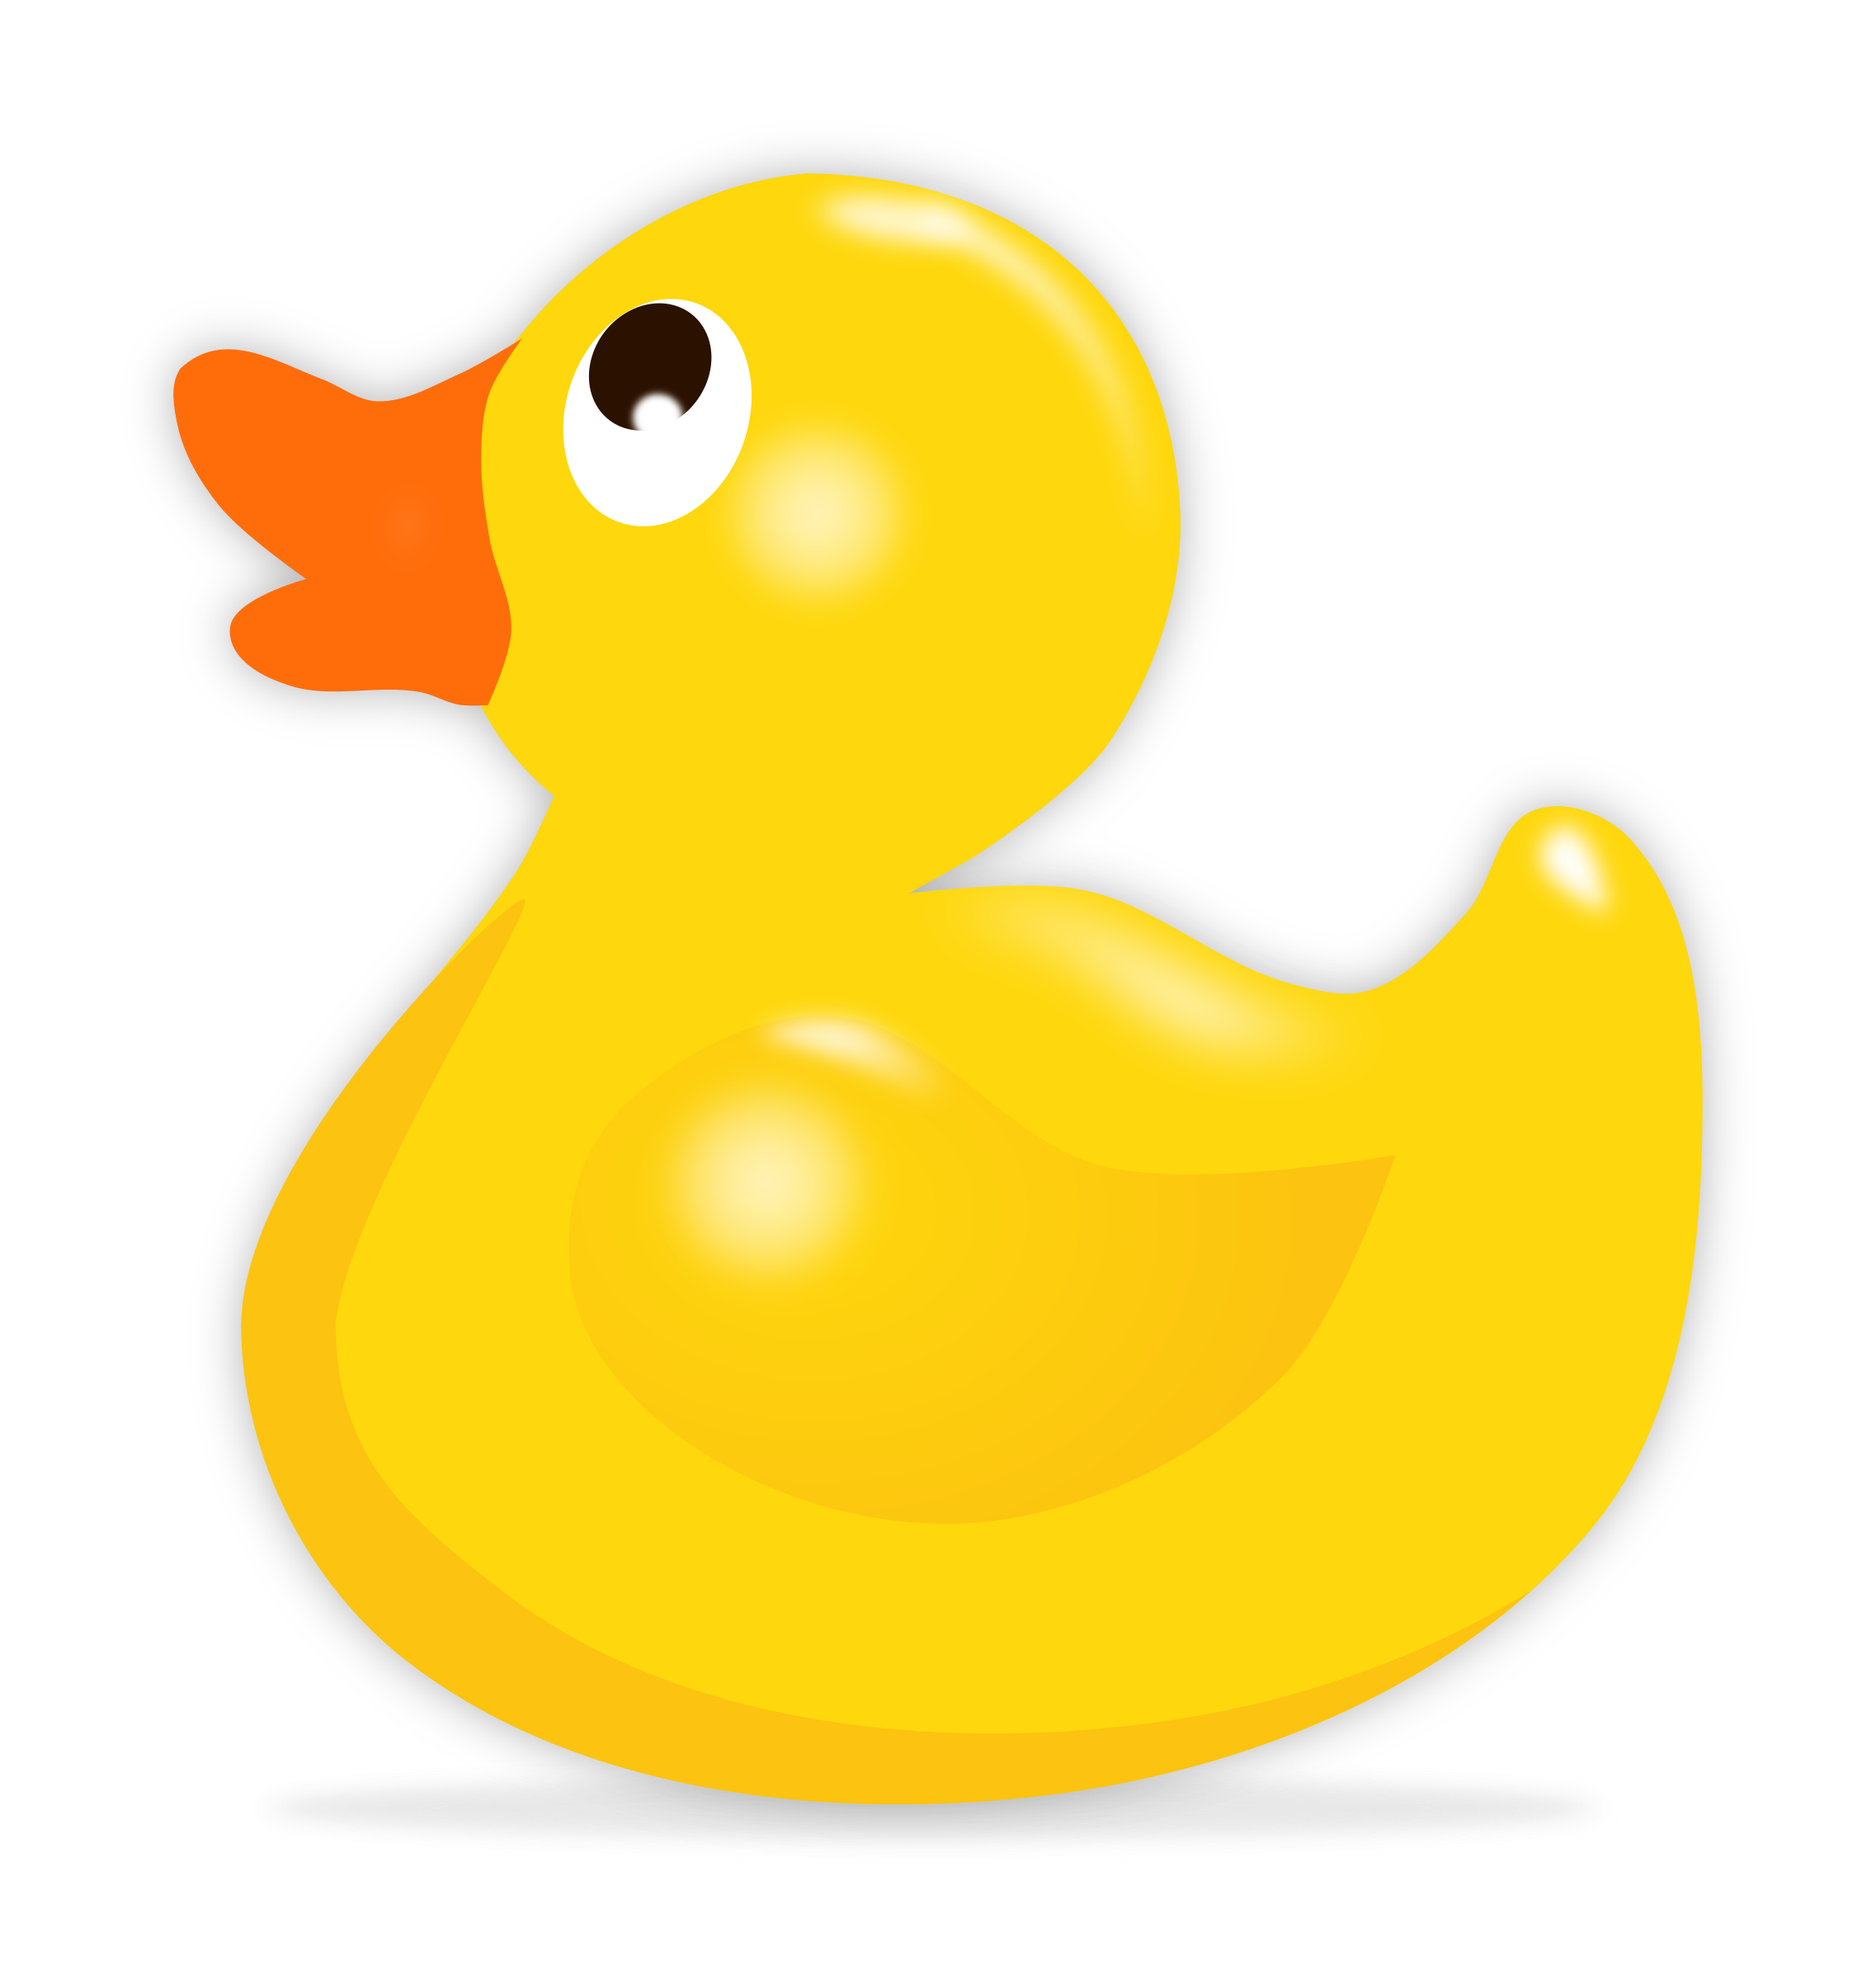 rubber duck images download #39259